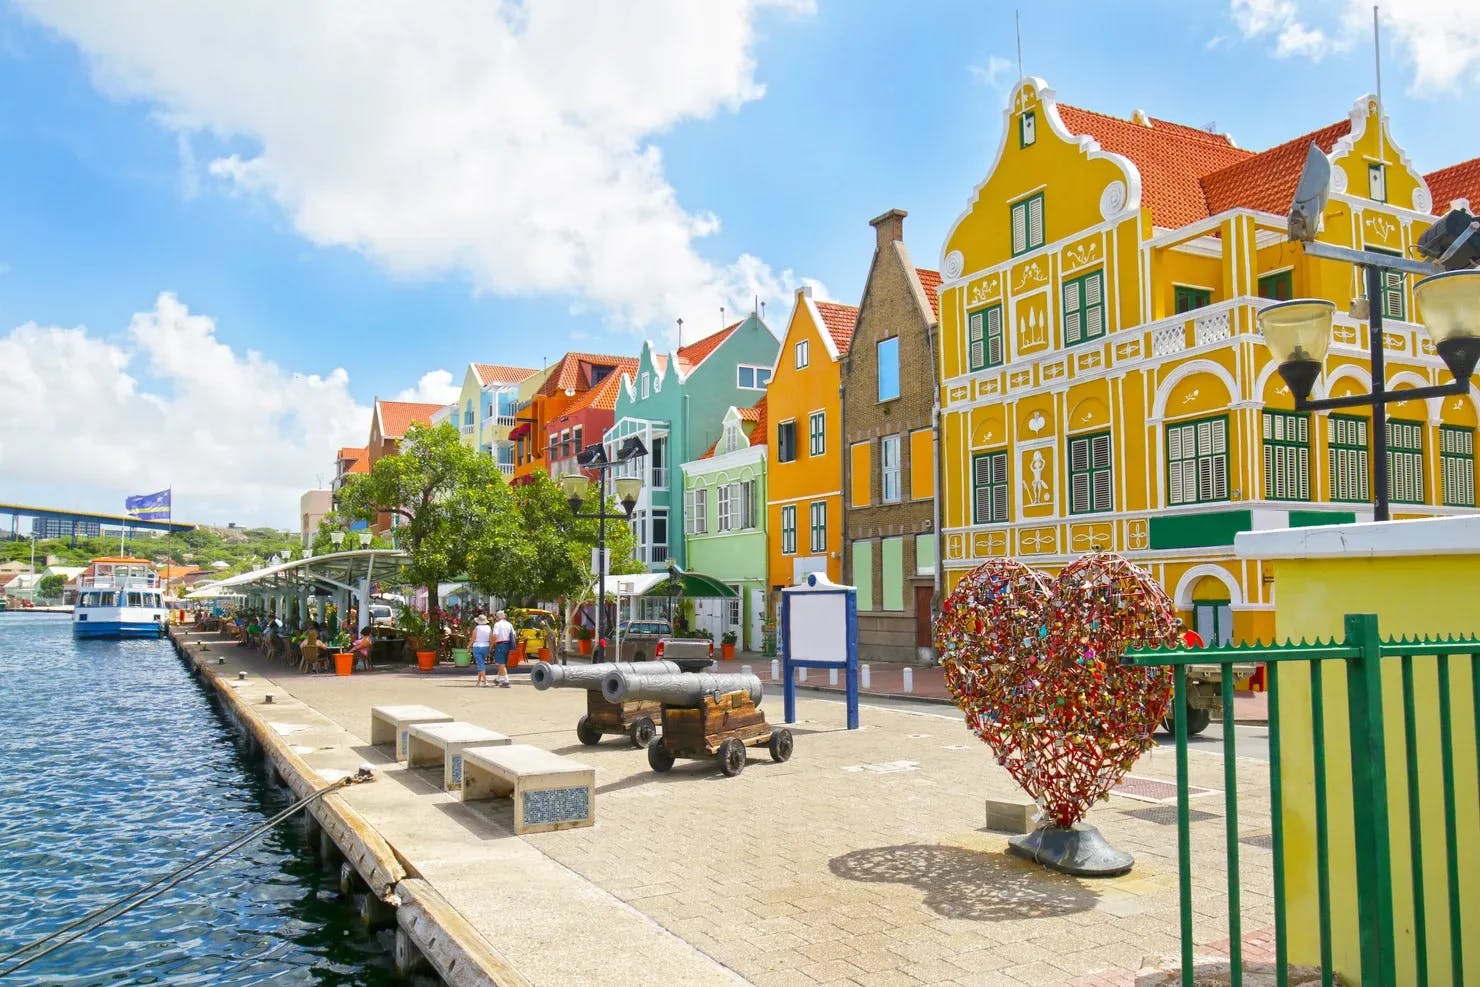 Colorful buildings in Willemstad, Curacao, the Caribbean